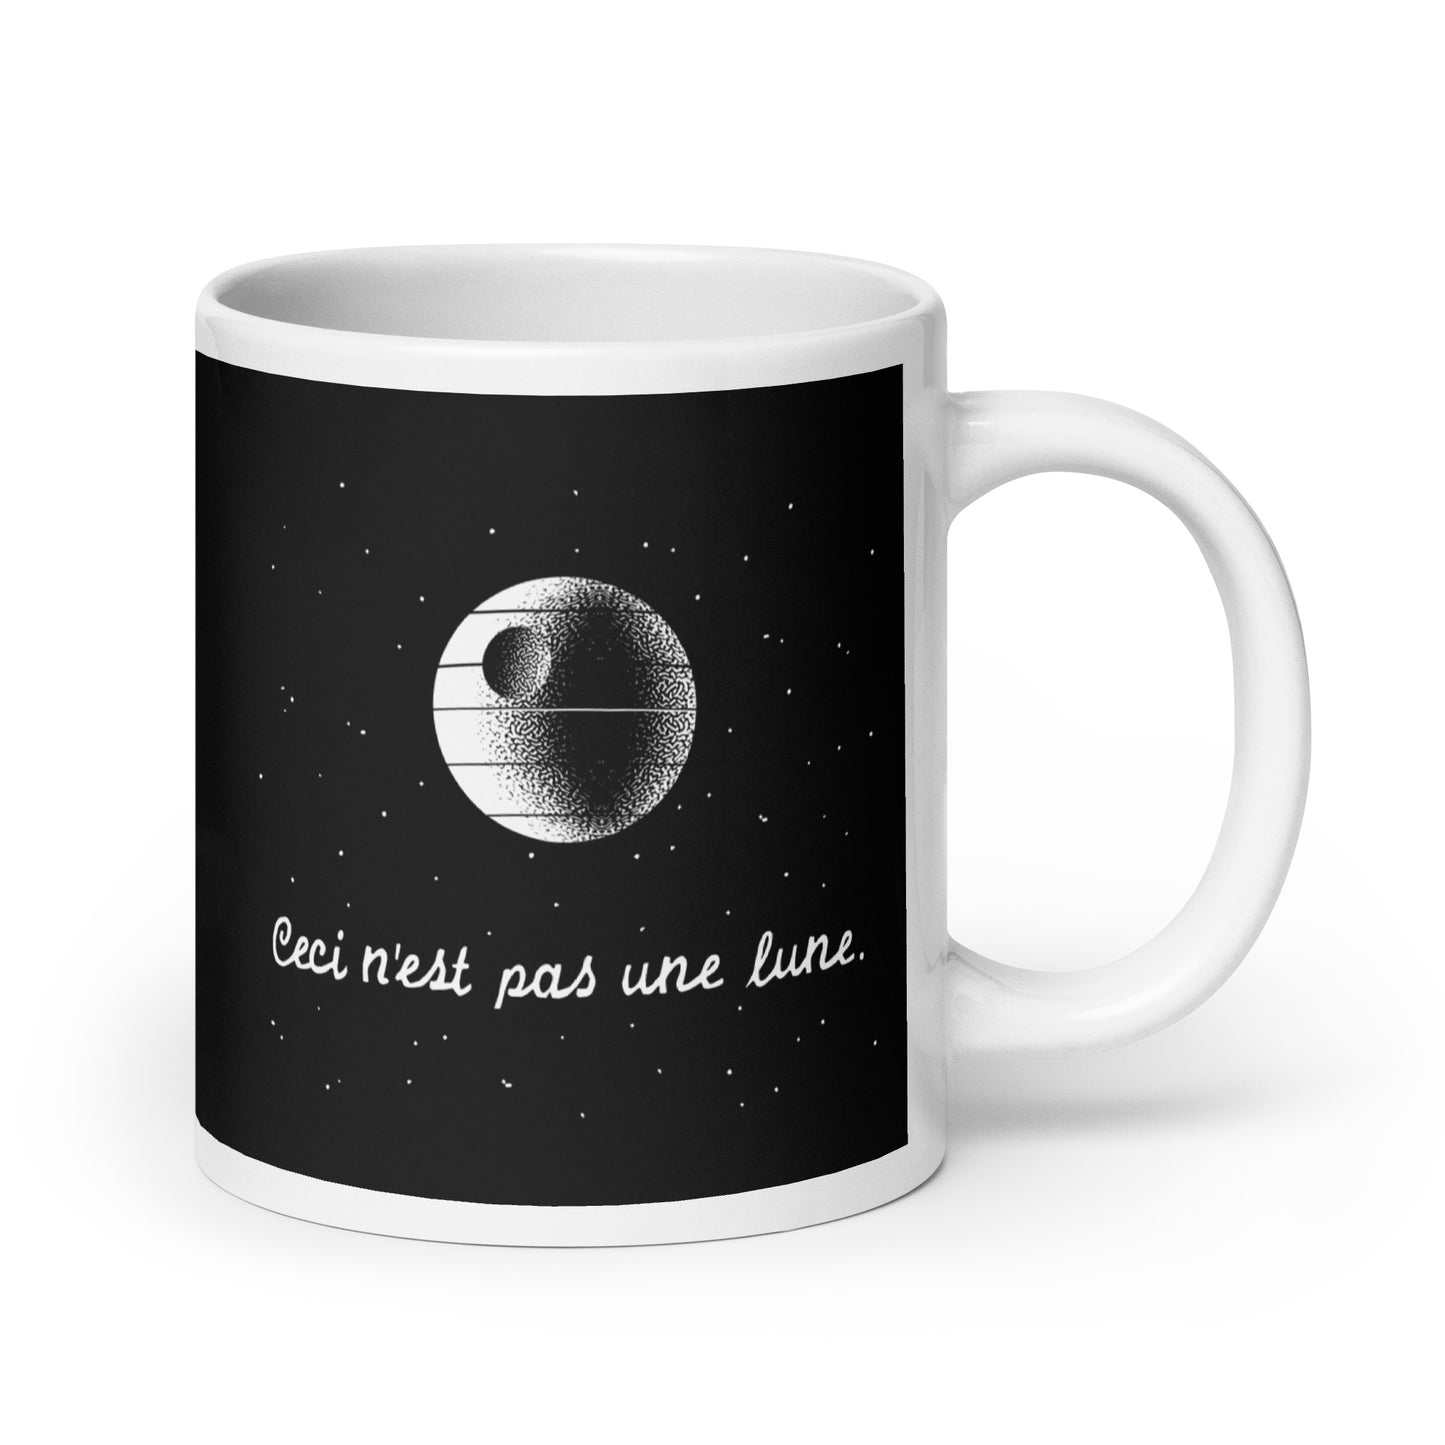 This Is Not A Moon Mug